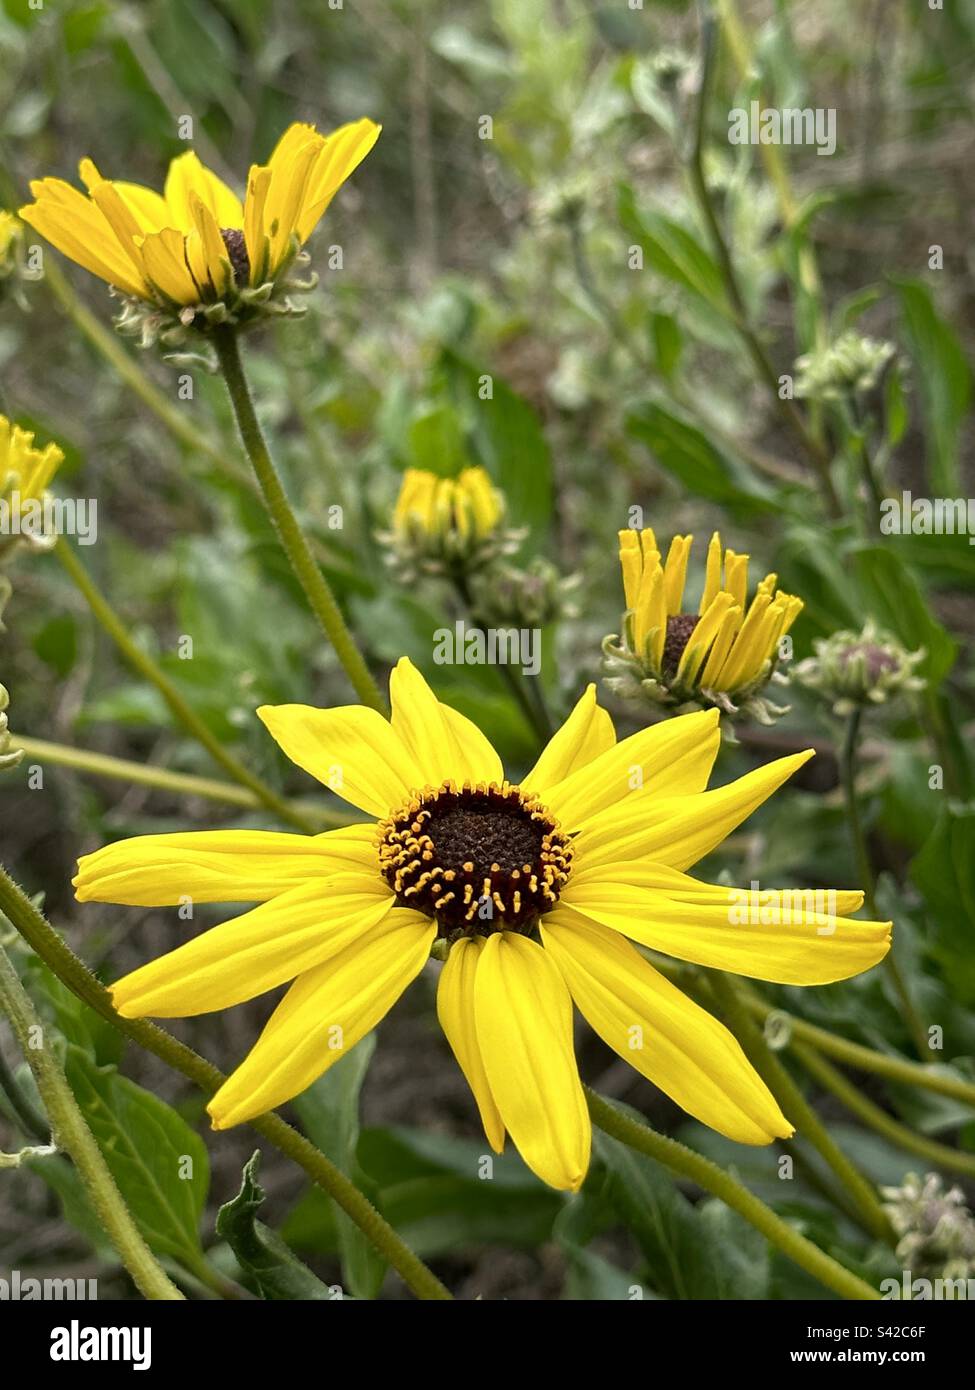 A beautiful sunflower blooms in early springtime in a field of wildflowers. Stock Photo